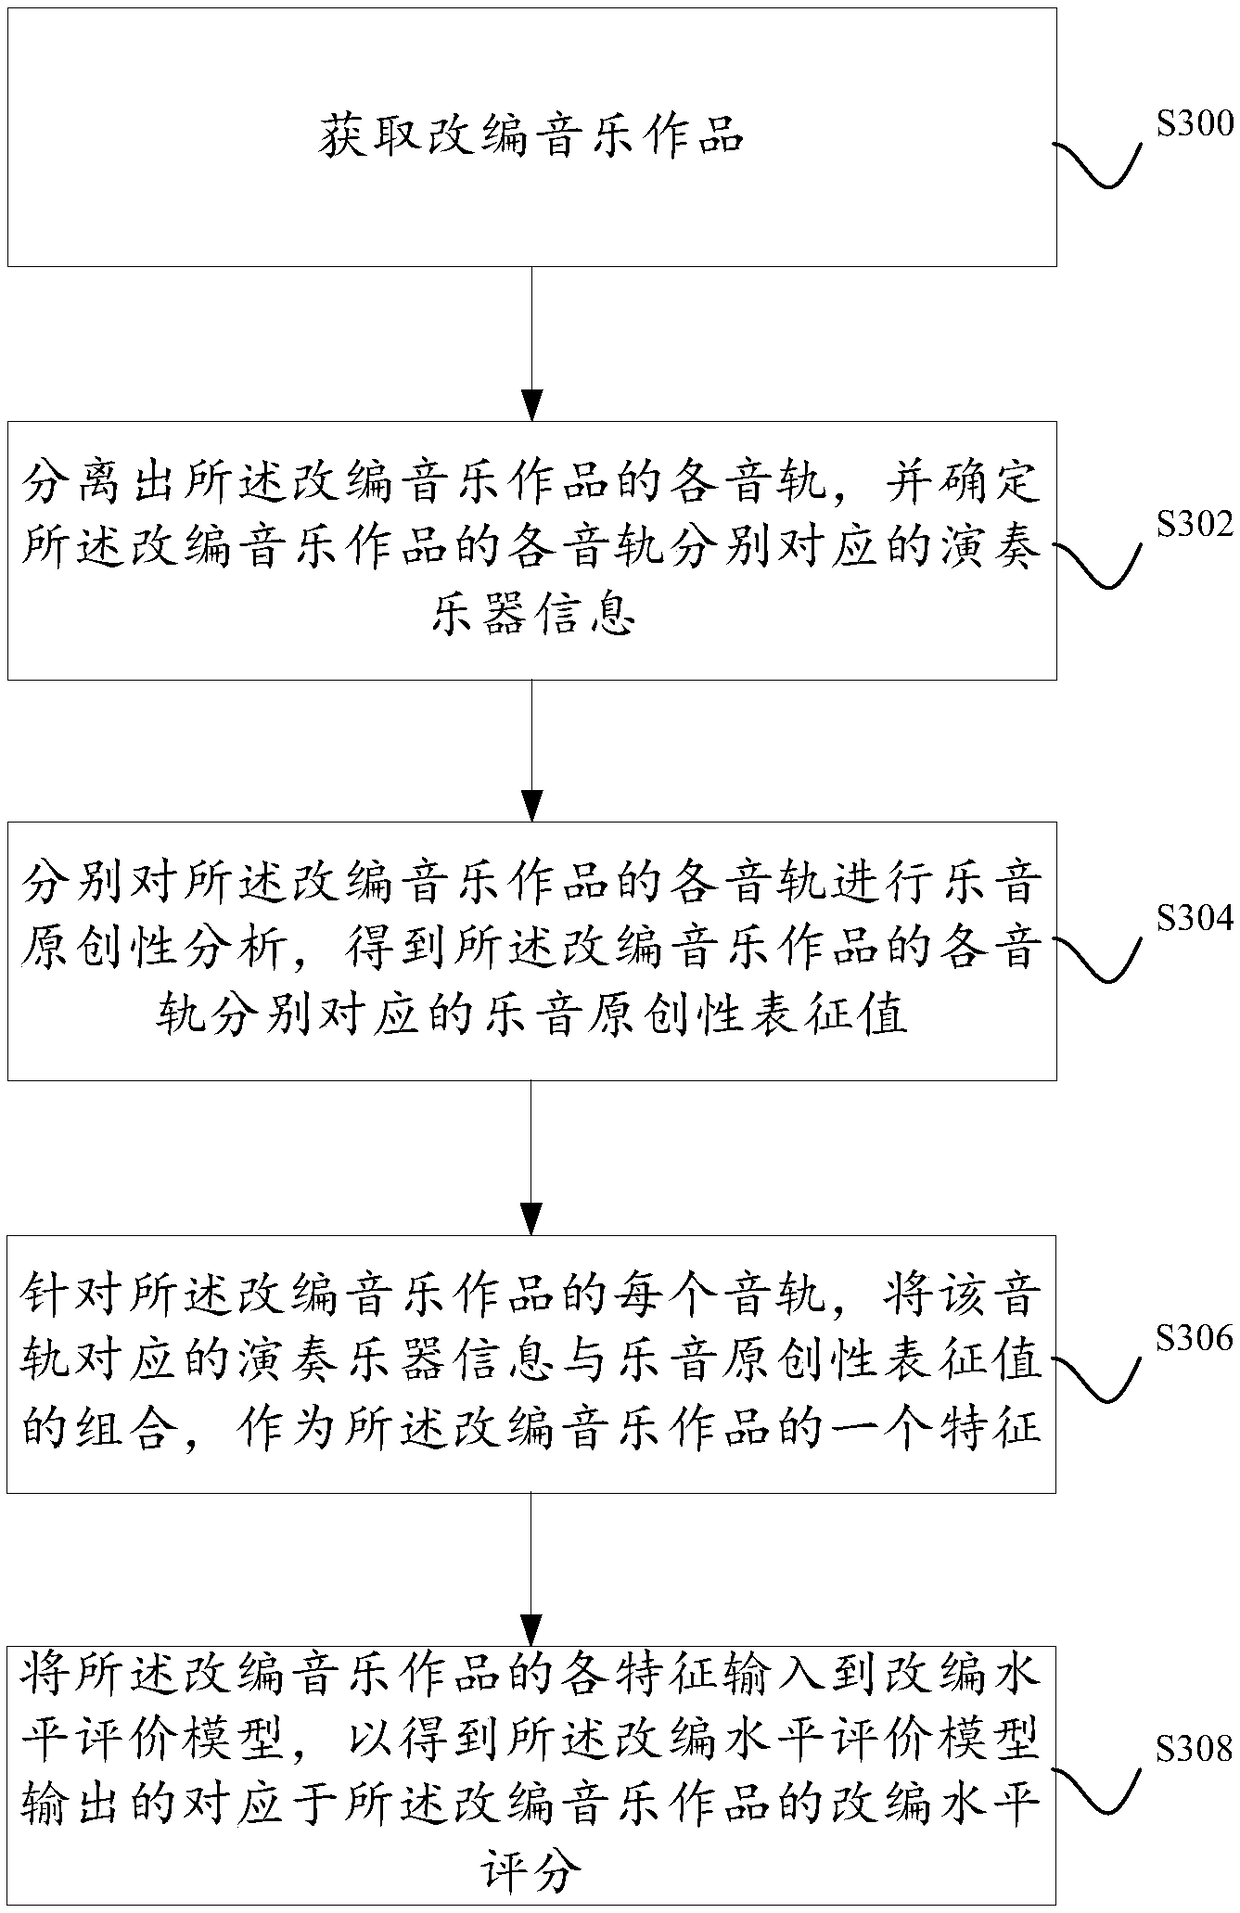 A method and apparatus for awarding a work performer based on a block chain